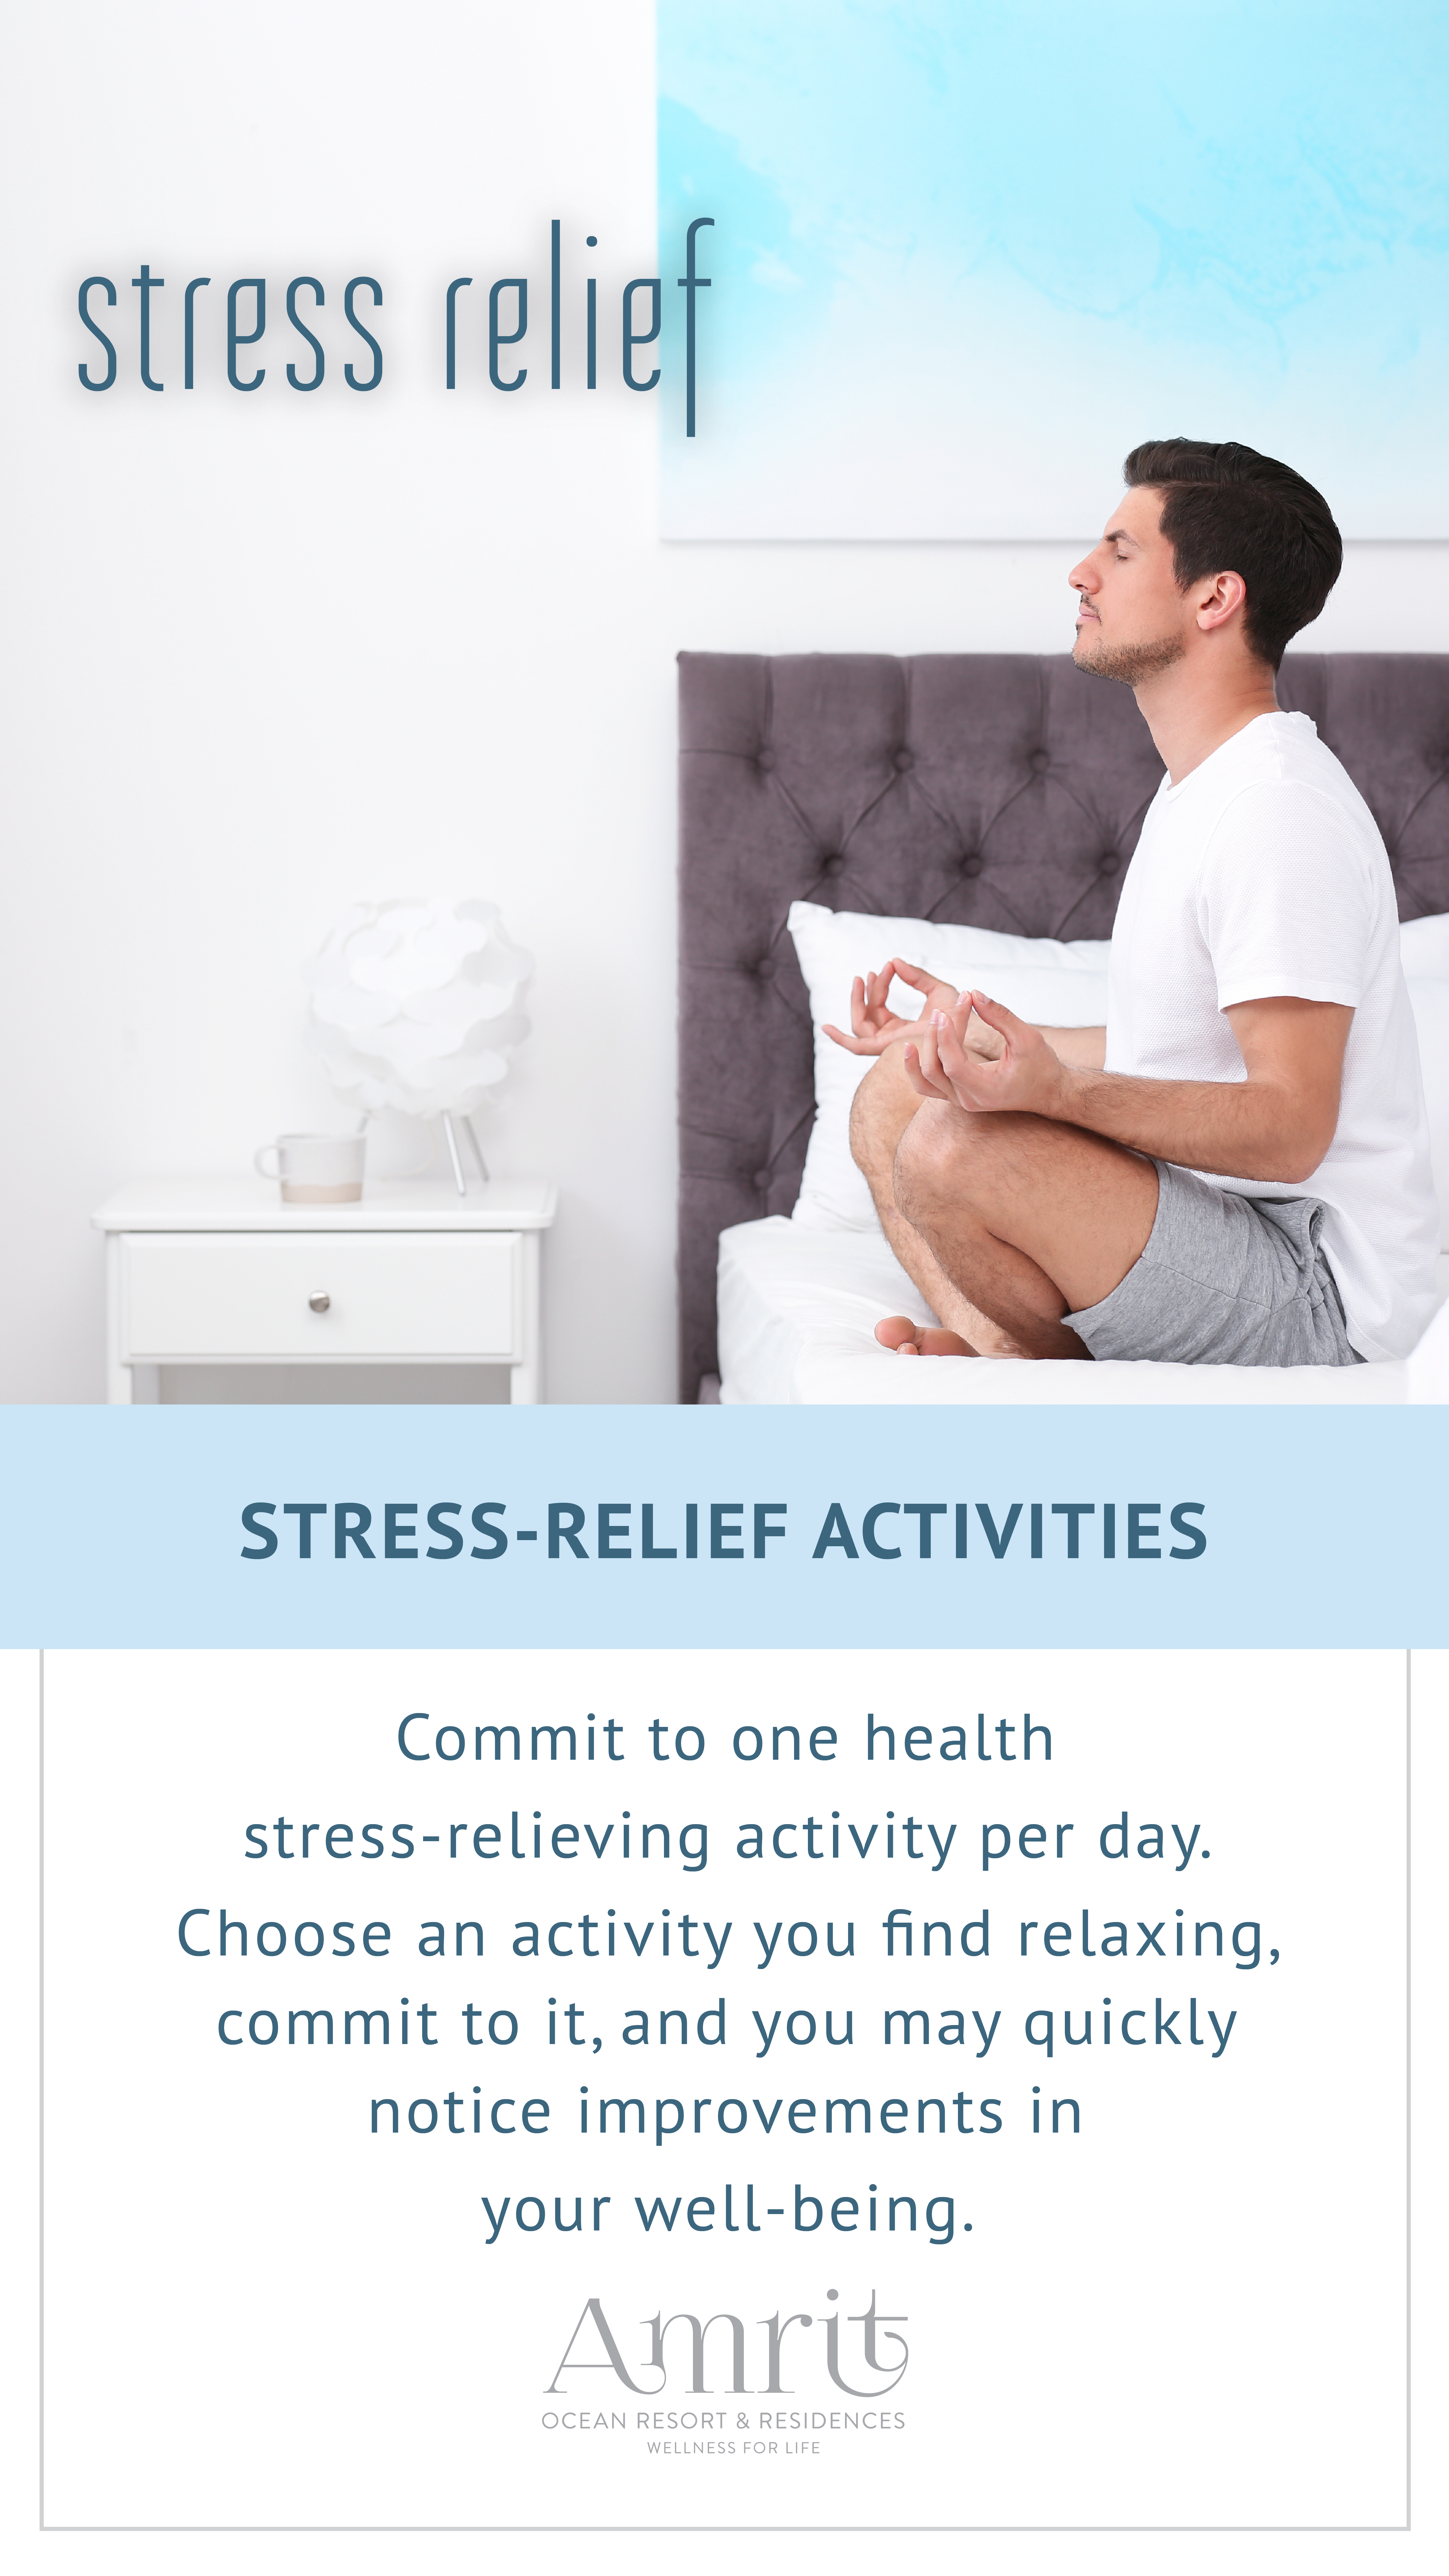 Commit to one health stress-relieving activity per day.